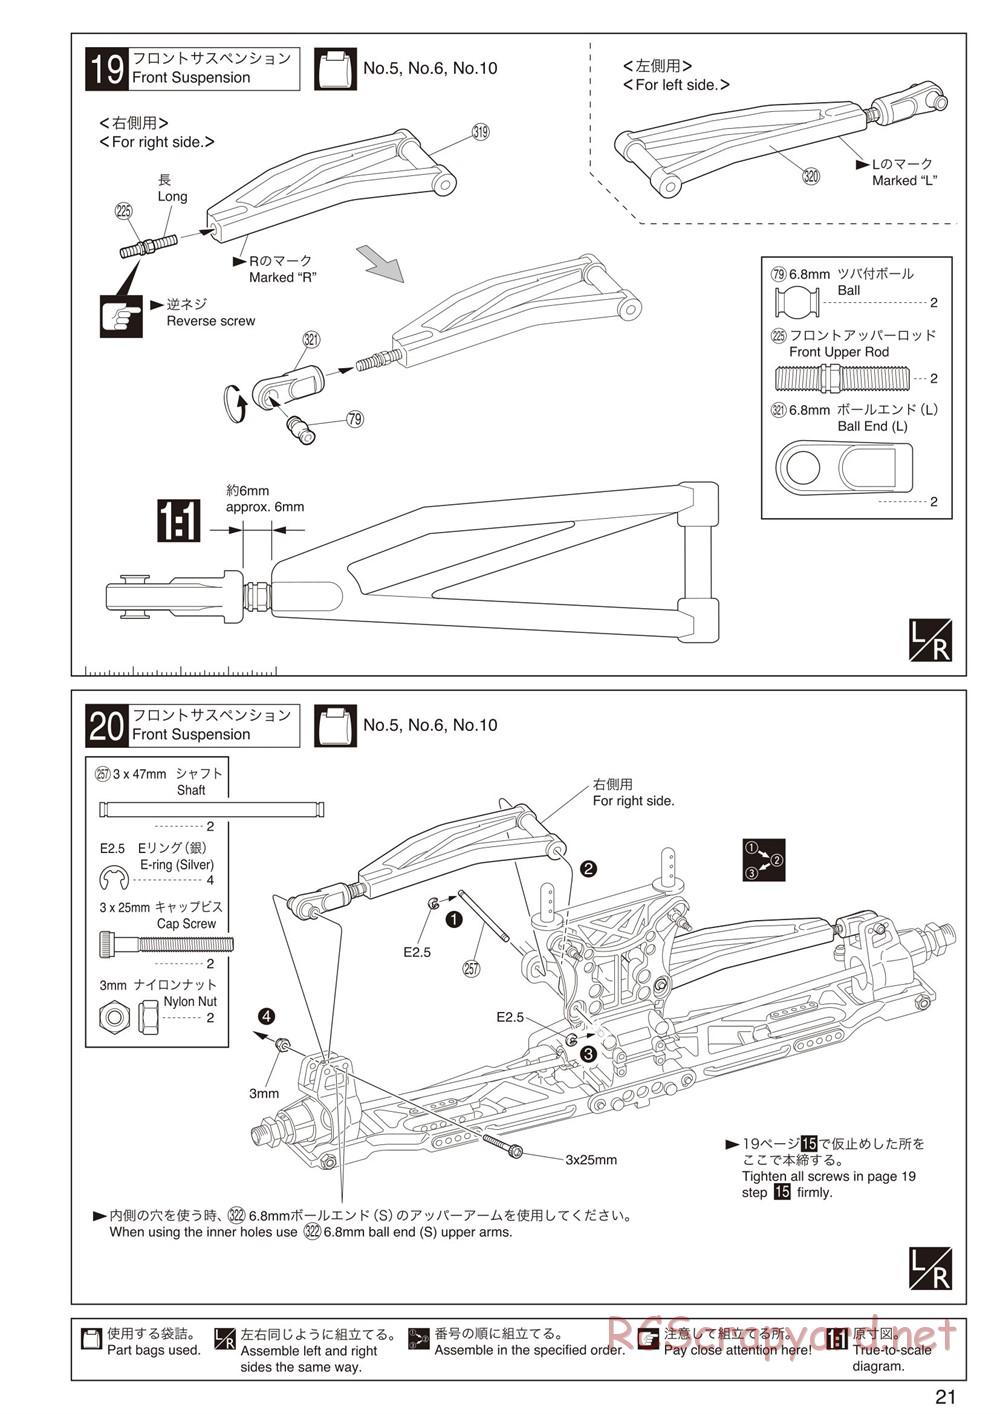 Kyosho - Inferno ST-RR Evo.2 - Manual - Page 25